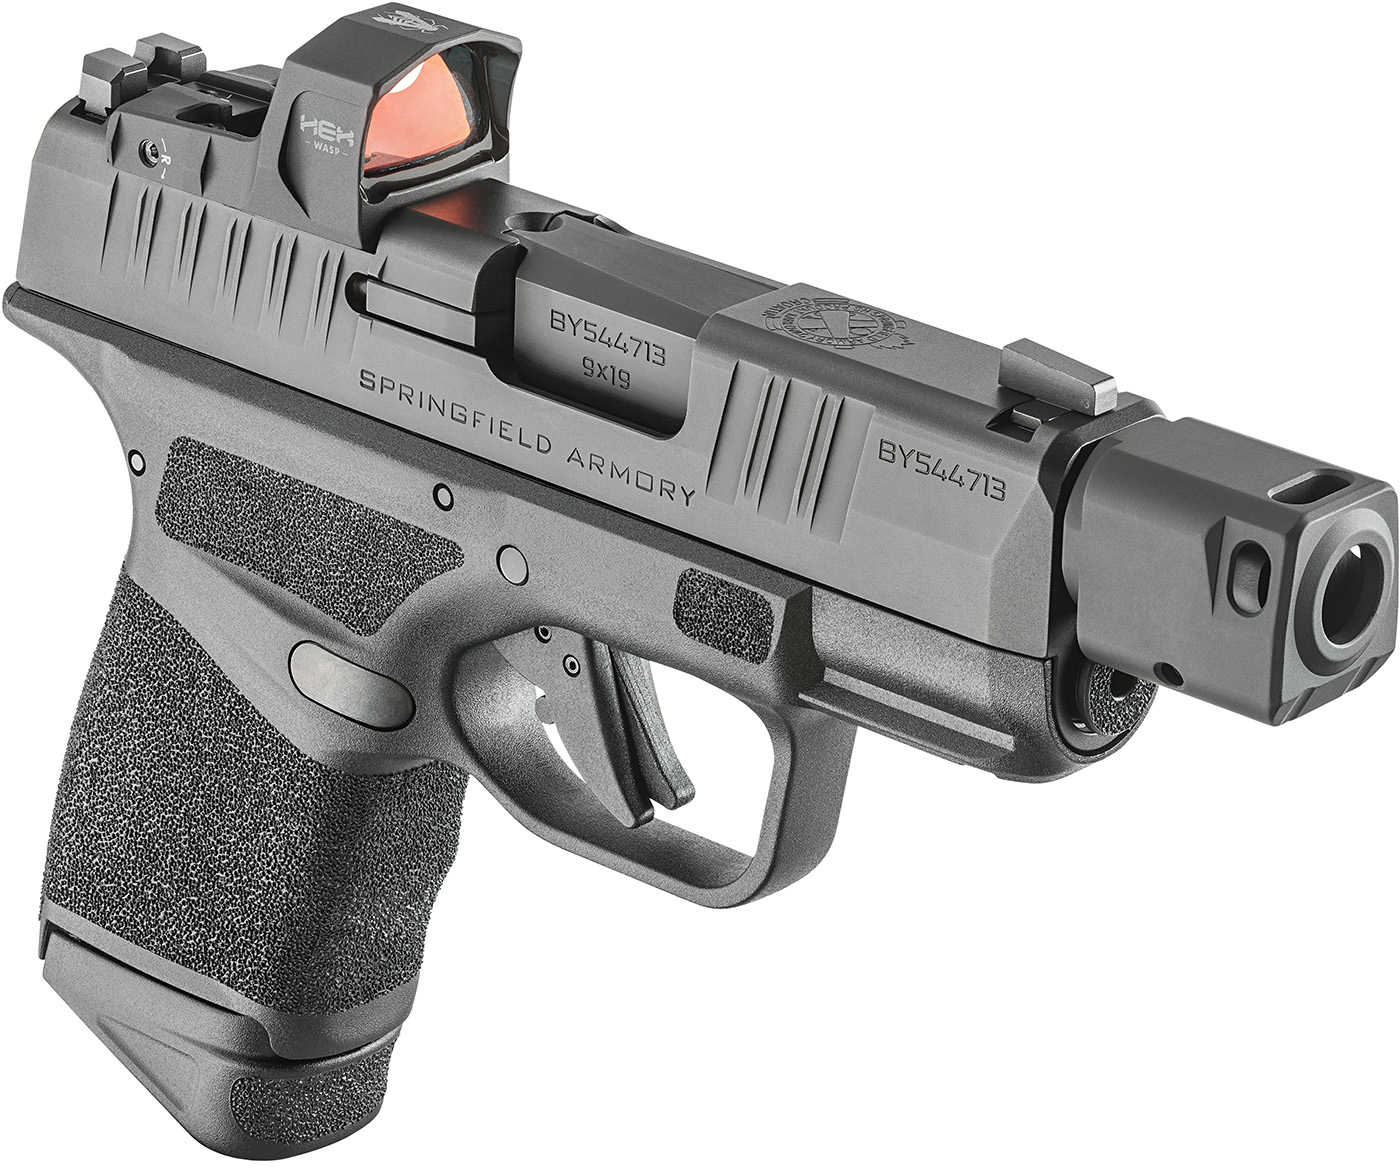 Springfield Armory Hellcat Micro-Compact RDP Pistol 9mm 3.80" Barrel 11 Round Tritium Front Sight Includes Hex Wasp Red Dot